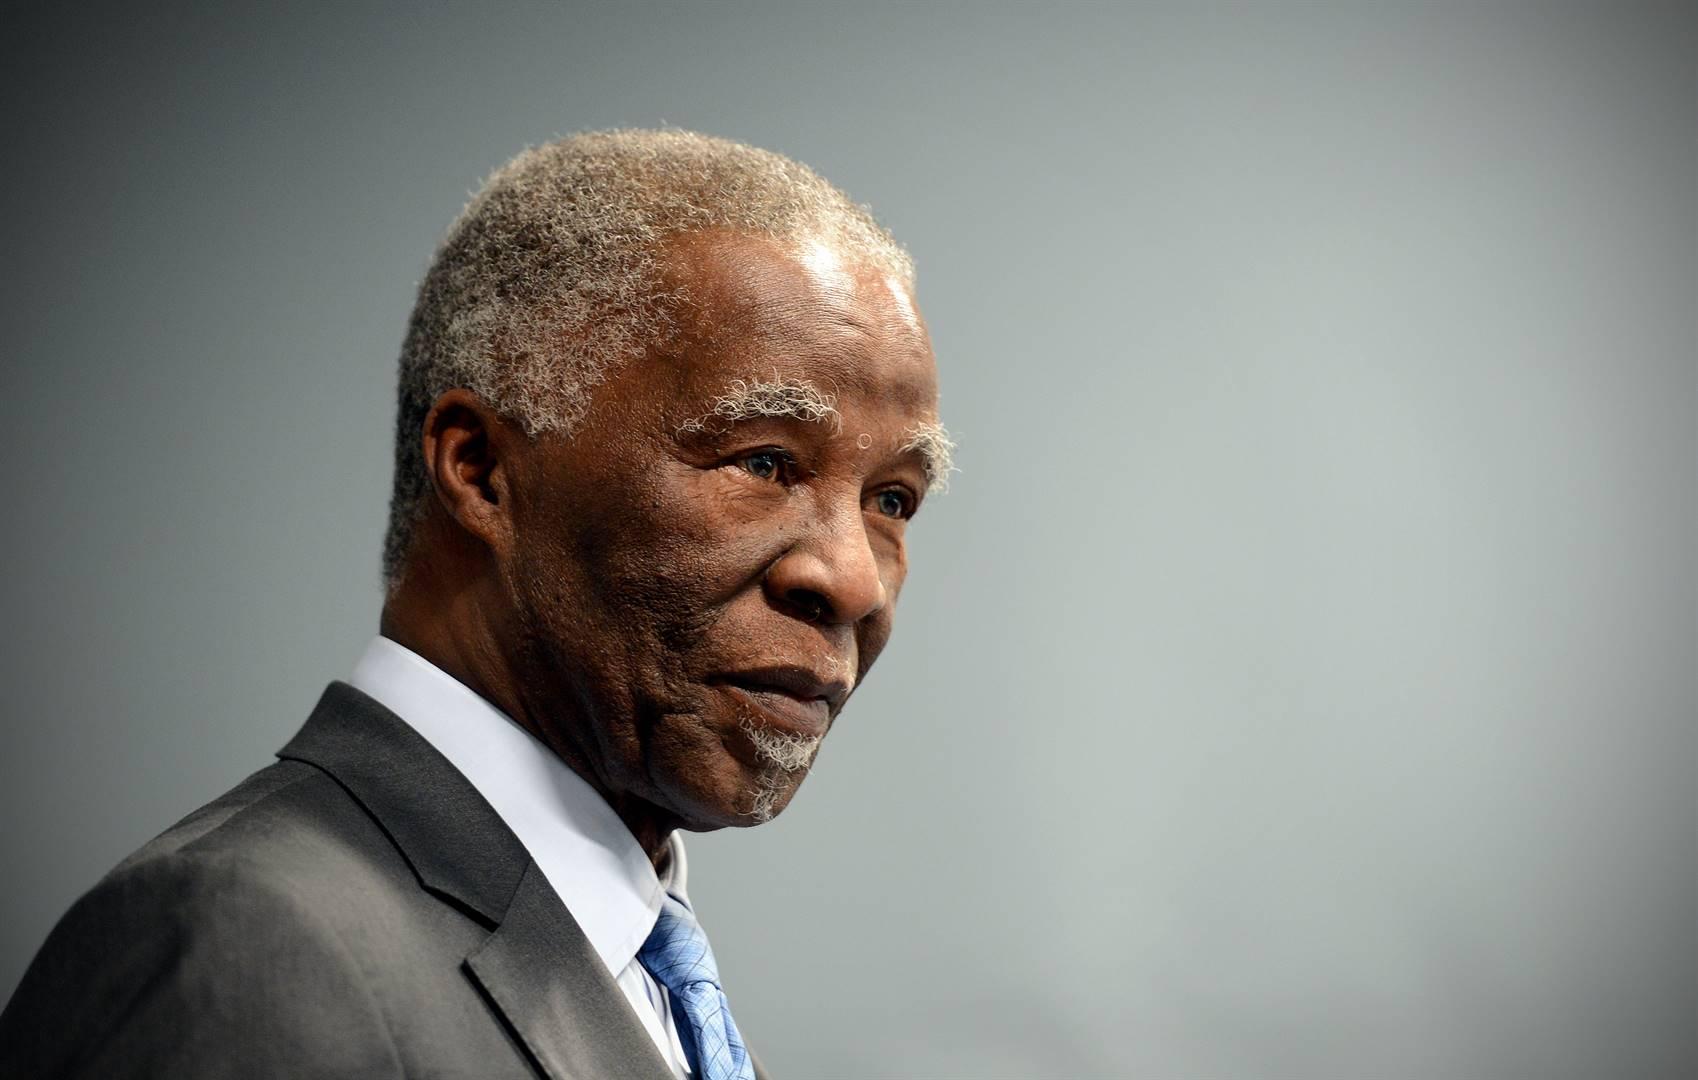 Lack of quality leadership the cause of SA's problems - Thabo Mbeki